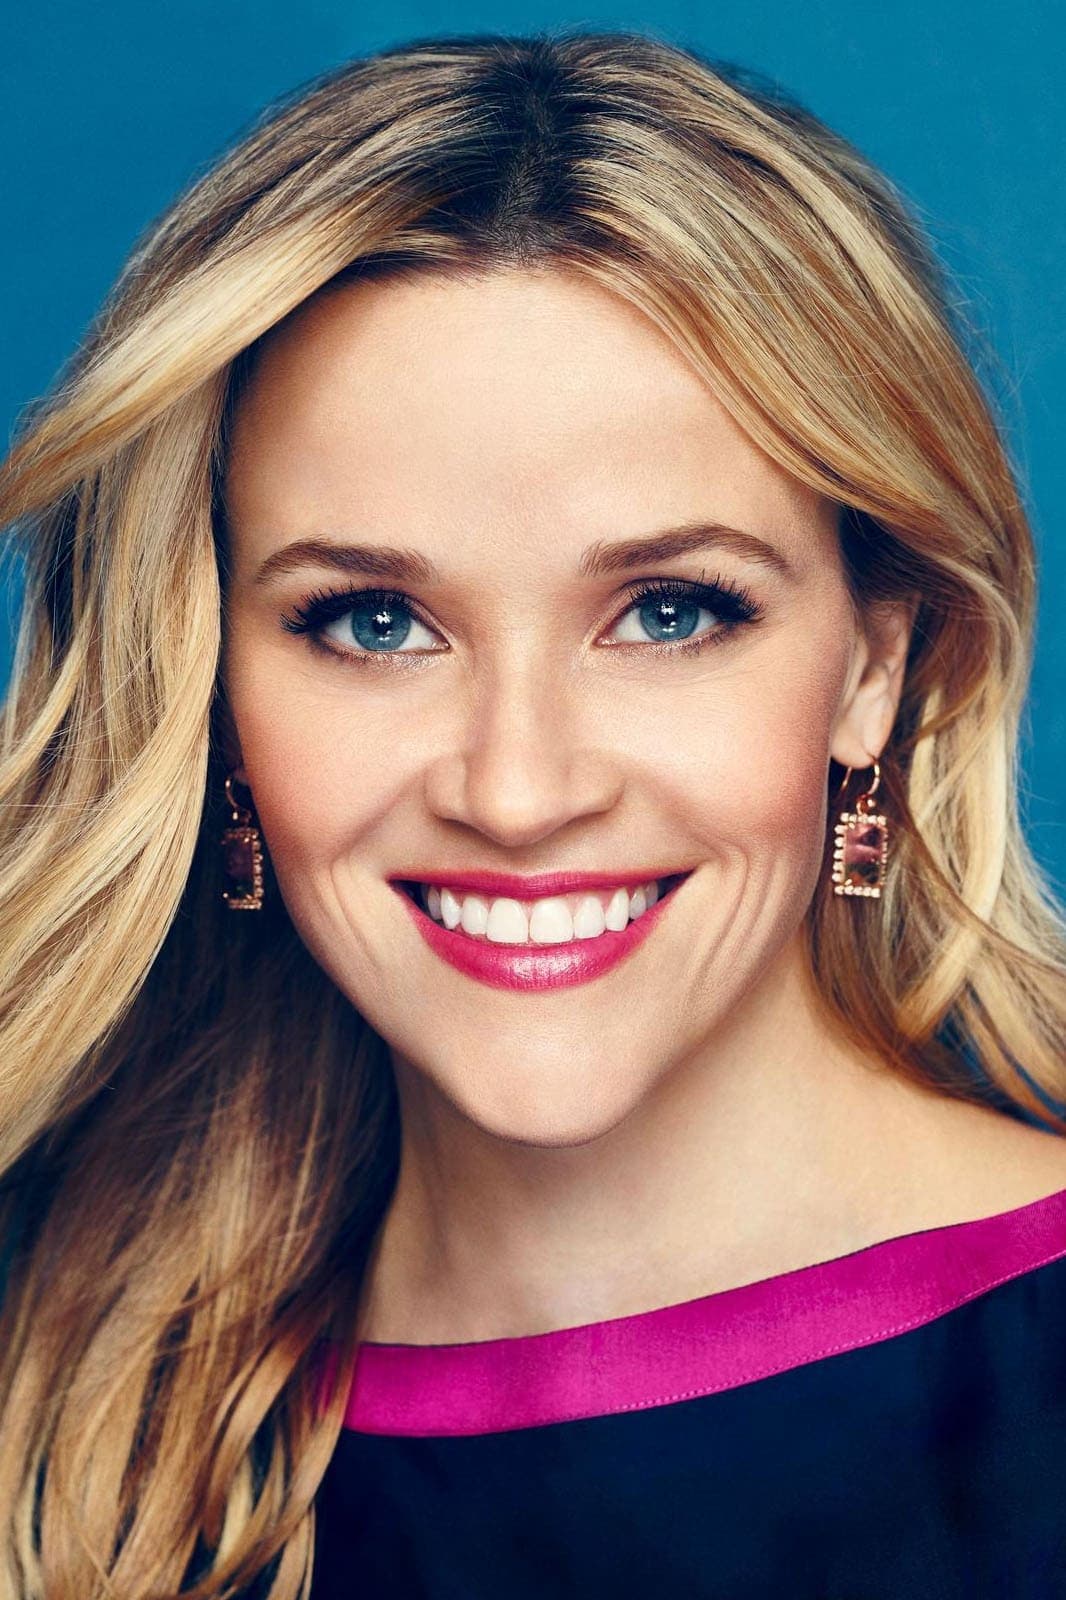 Reese Witherspoon | Producer